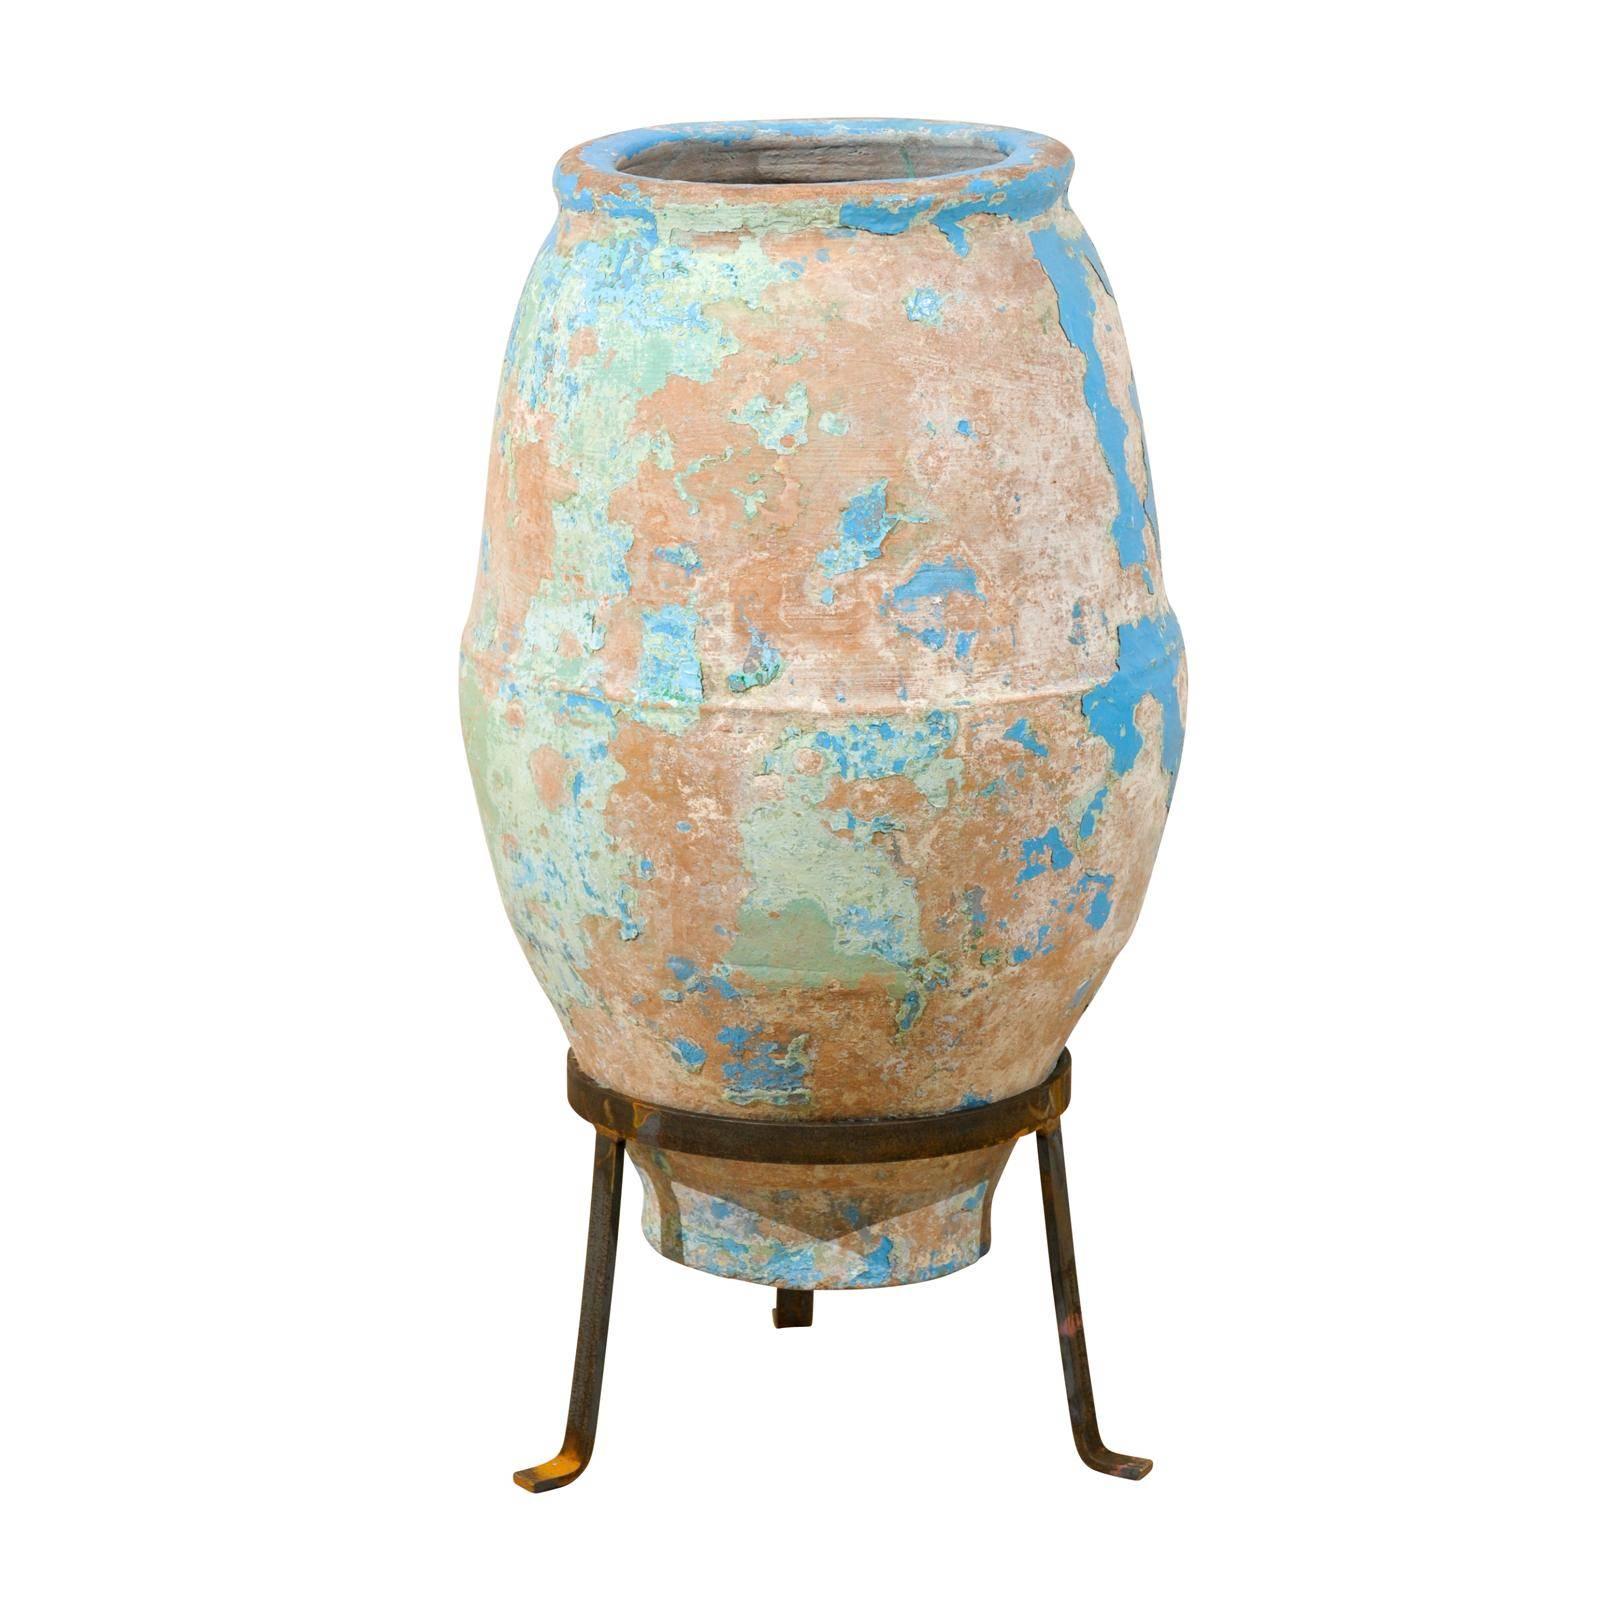 Spanish, Mid-19th C. Terracotta Olive Jar with Remains of Blue / Turquoise Paint